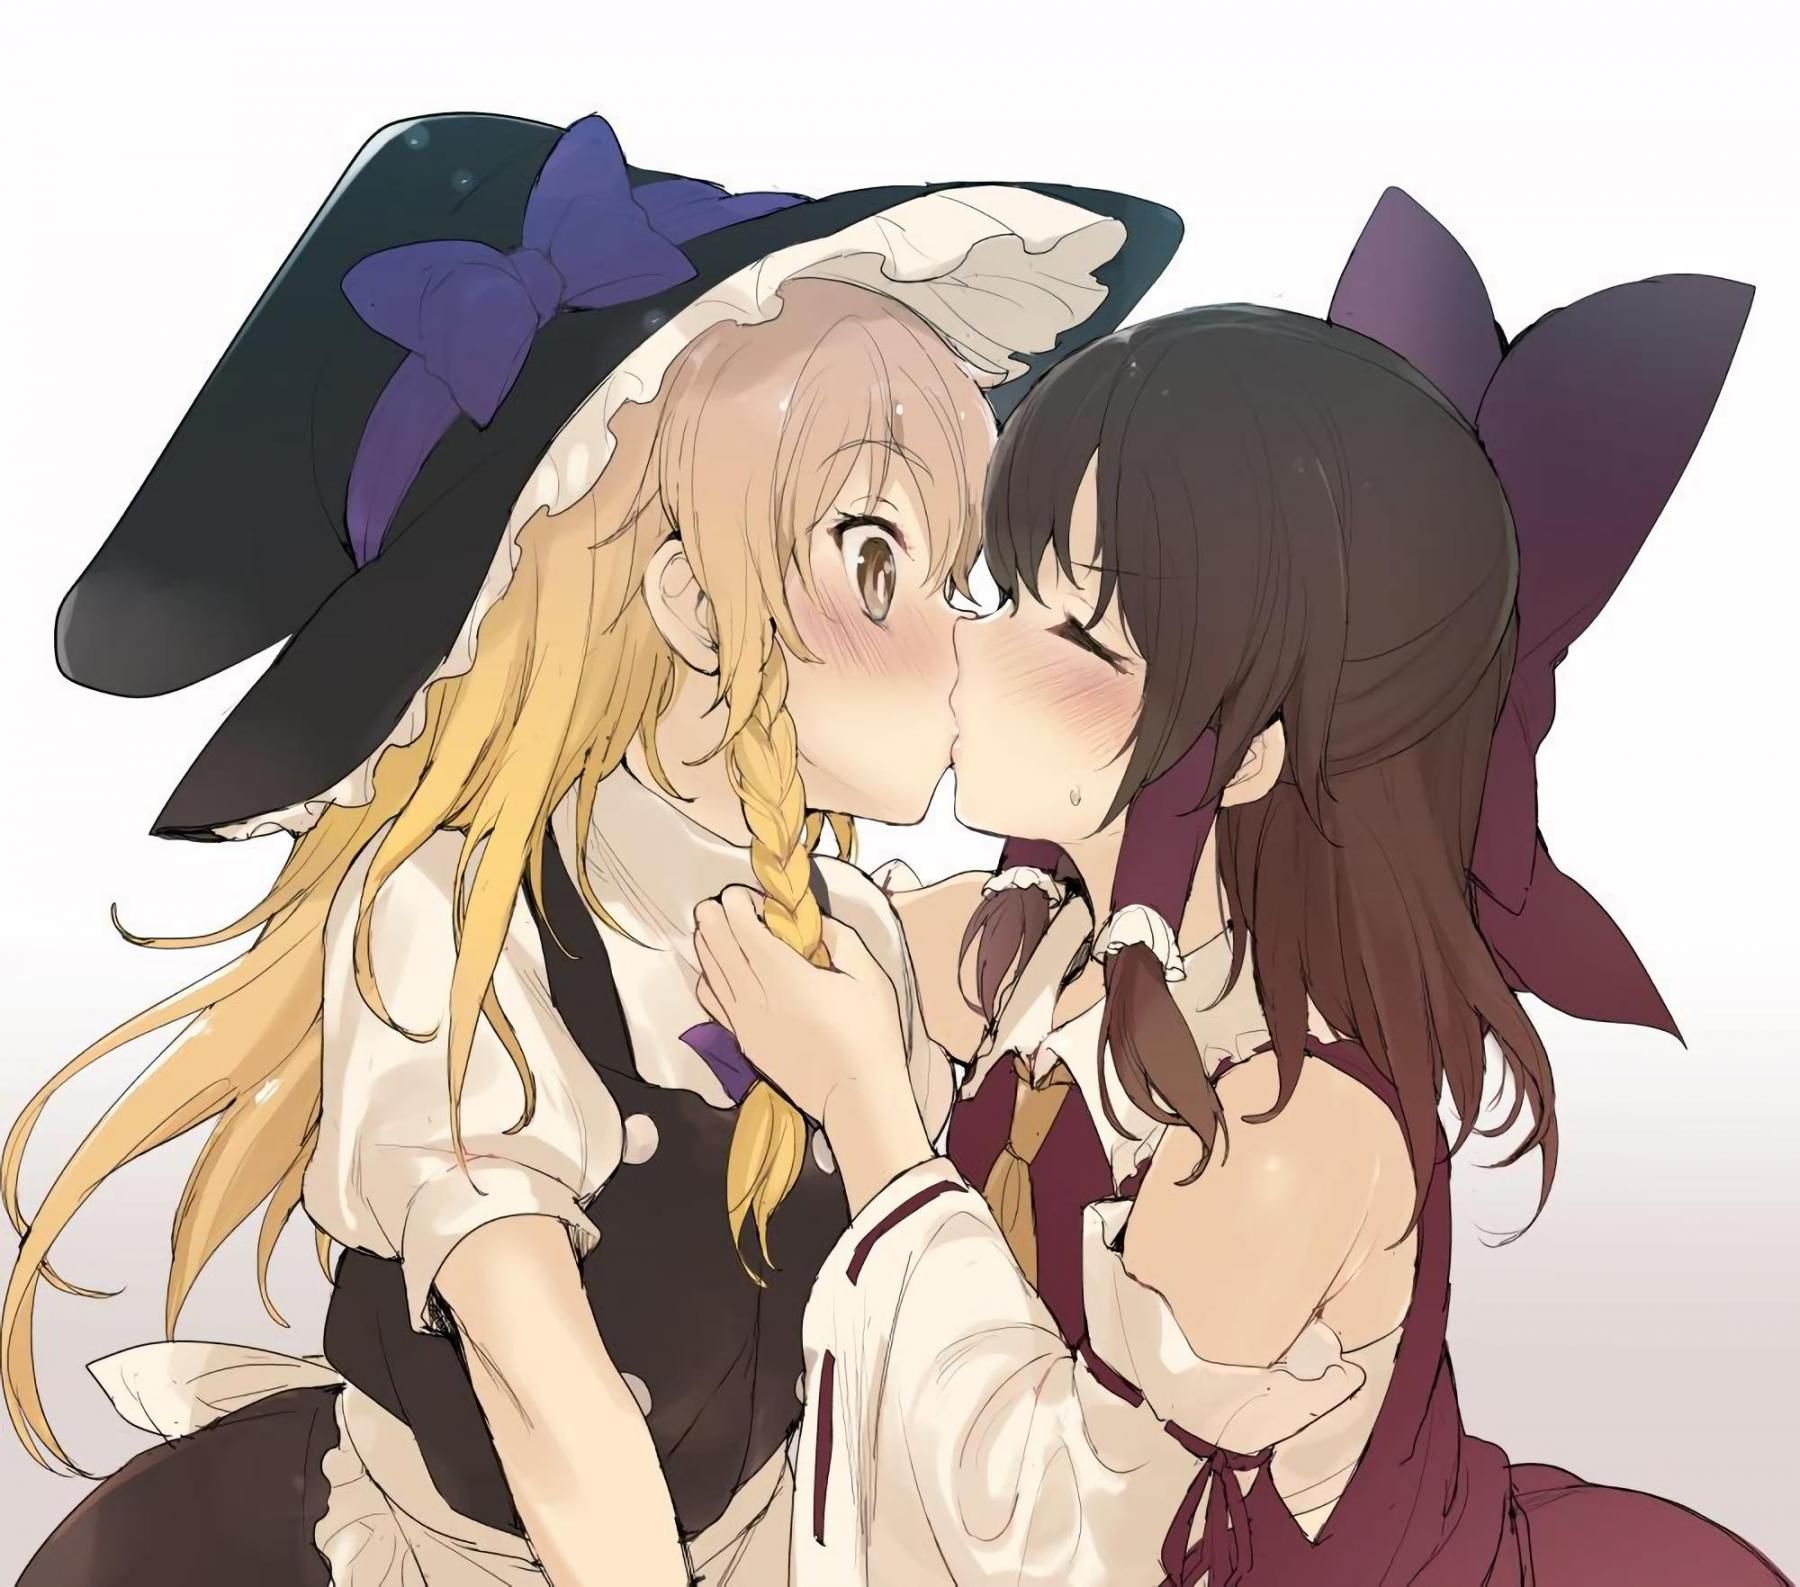 [2nd] The second erotic image that has been entwined violently between beautiful girl 34 [yuri/lesbian] 26